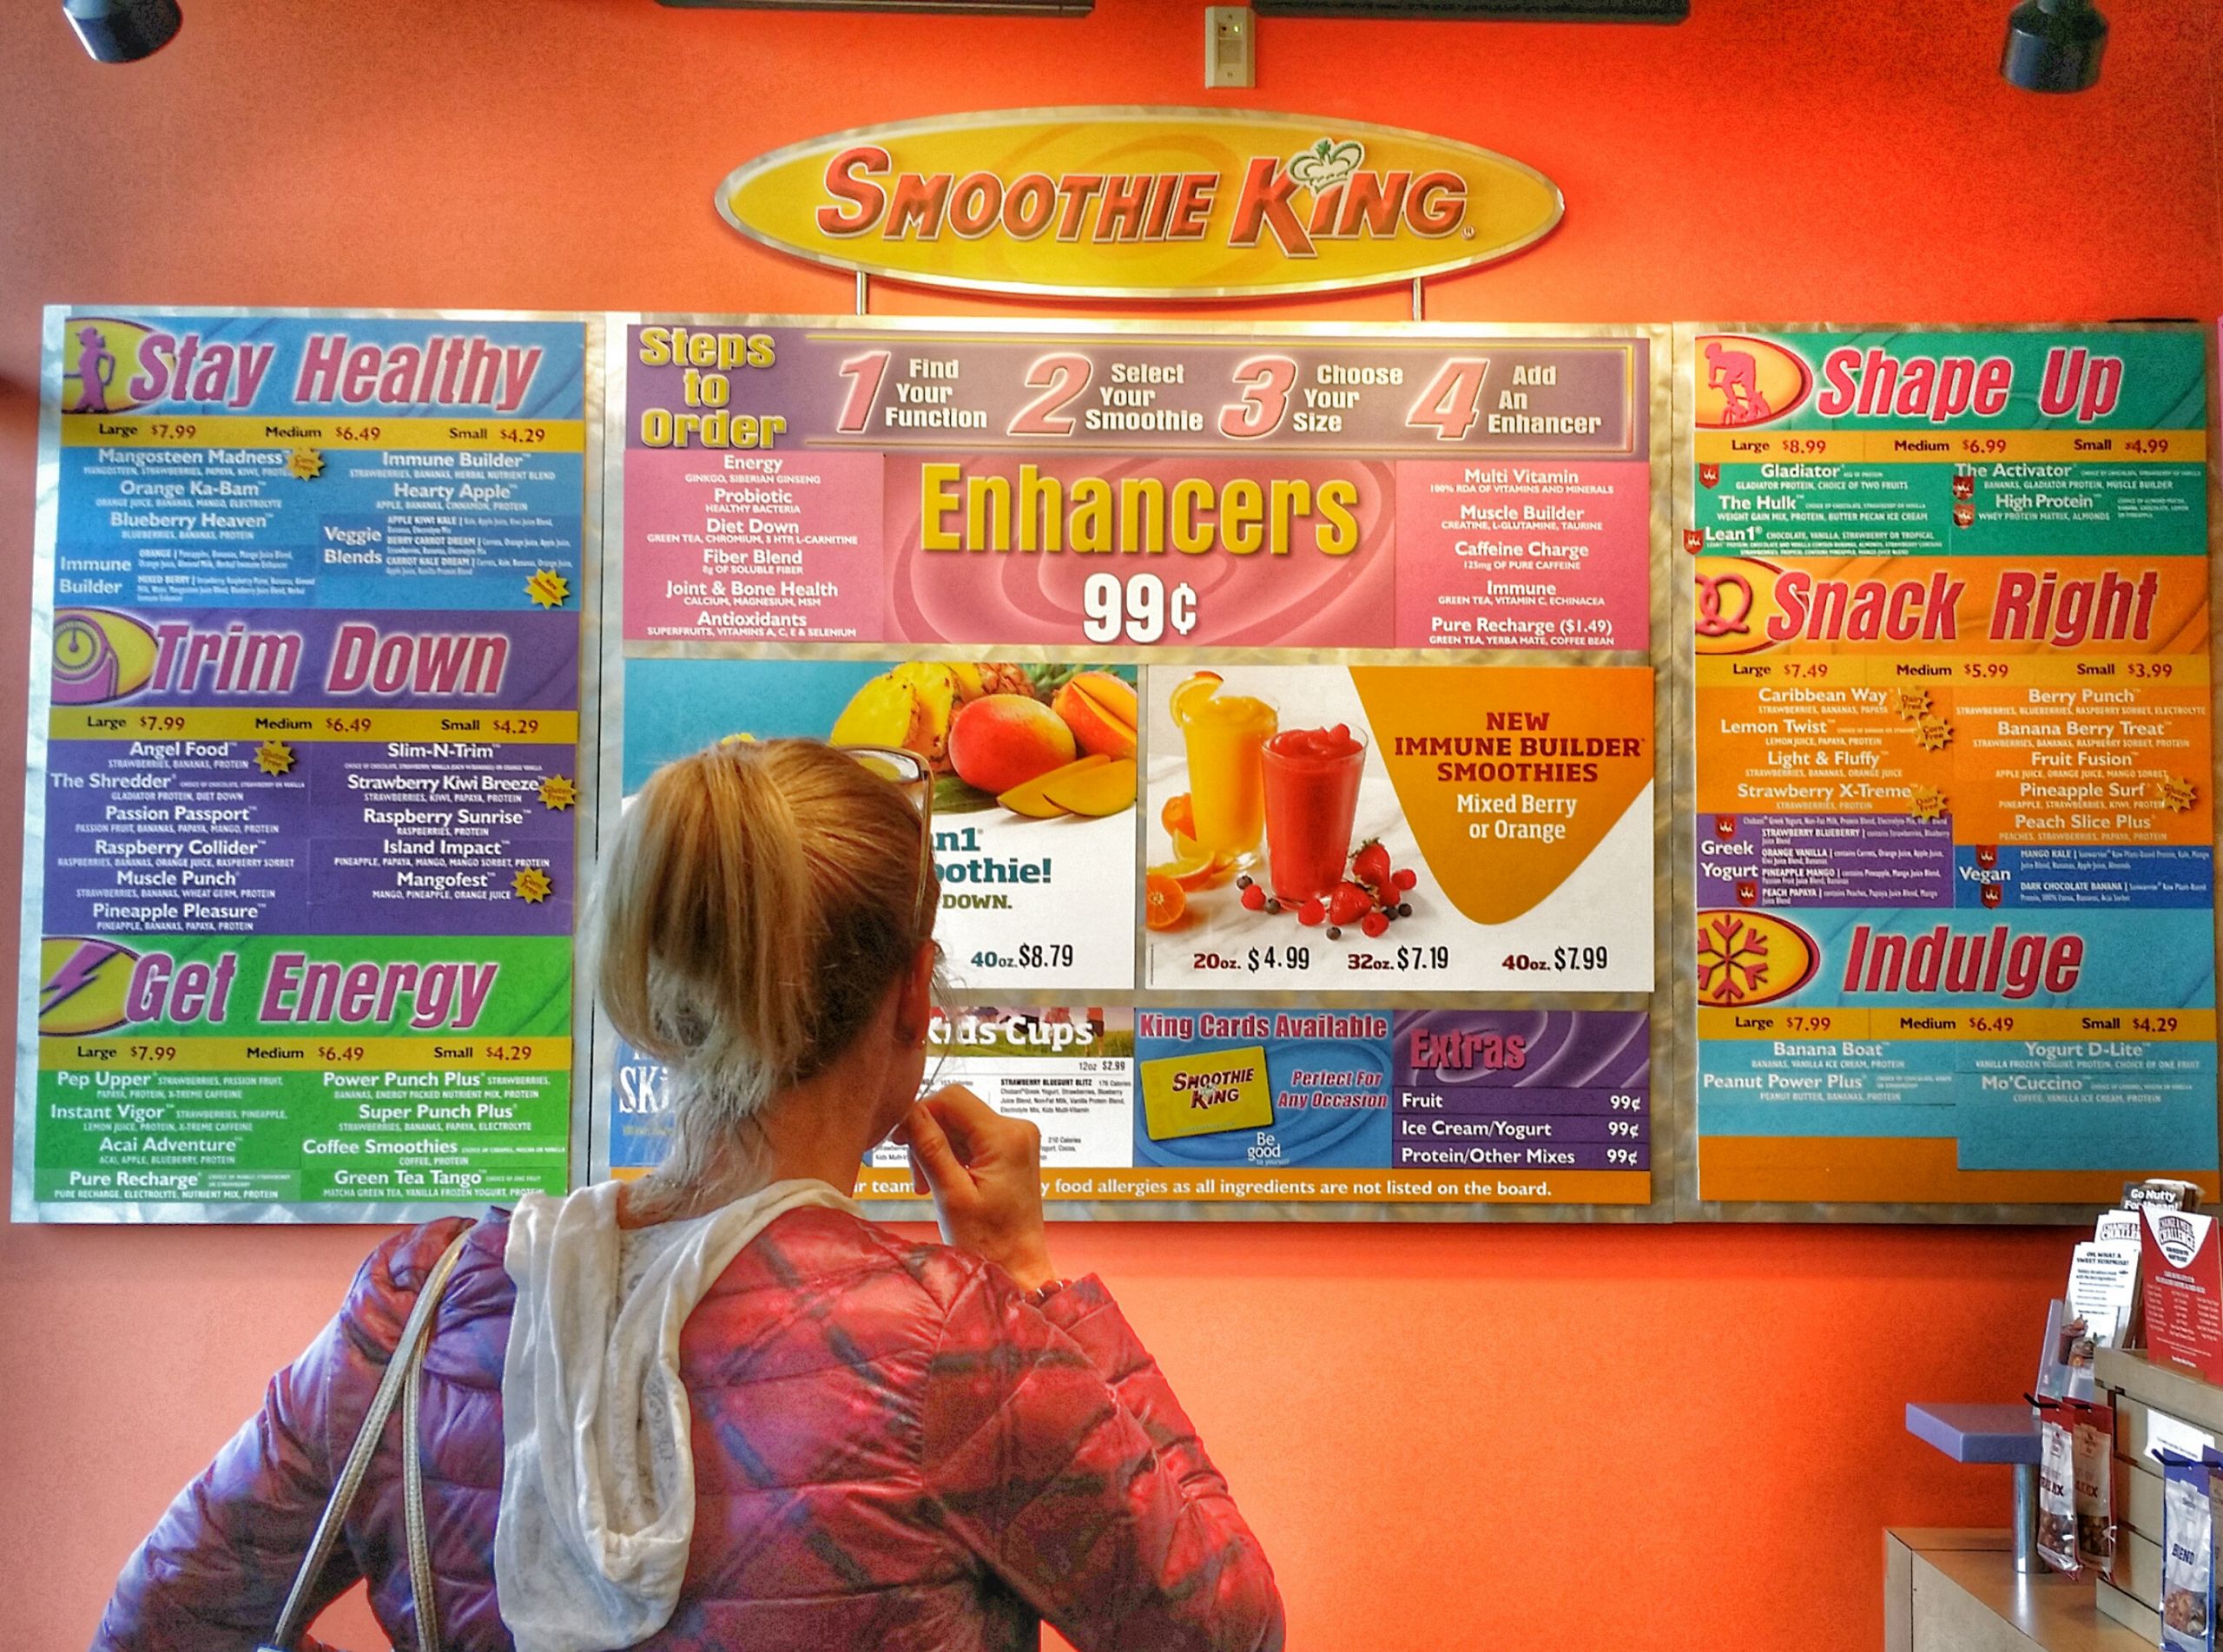 Healthy Smoothies At Smoothie King
 More Fun More Flavor – Mixing Up Health and Fitness Goals